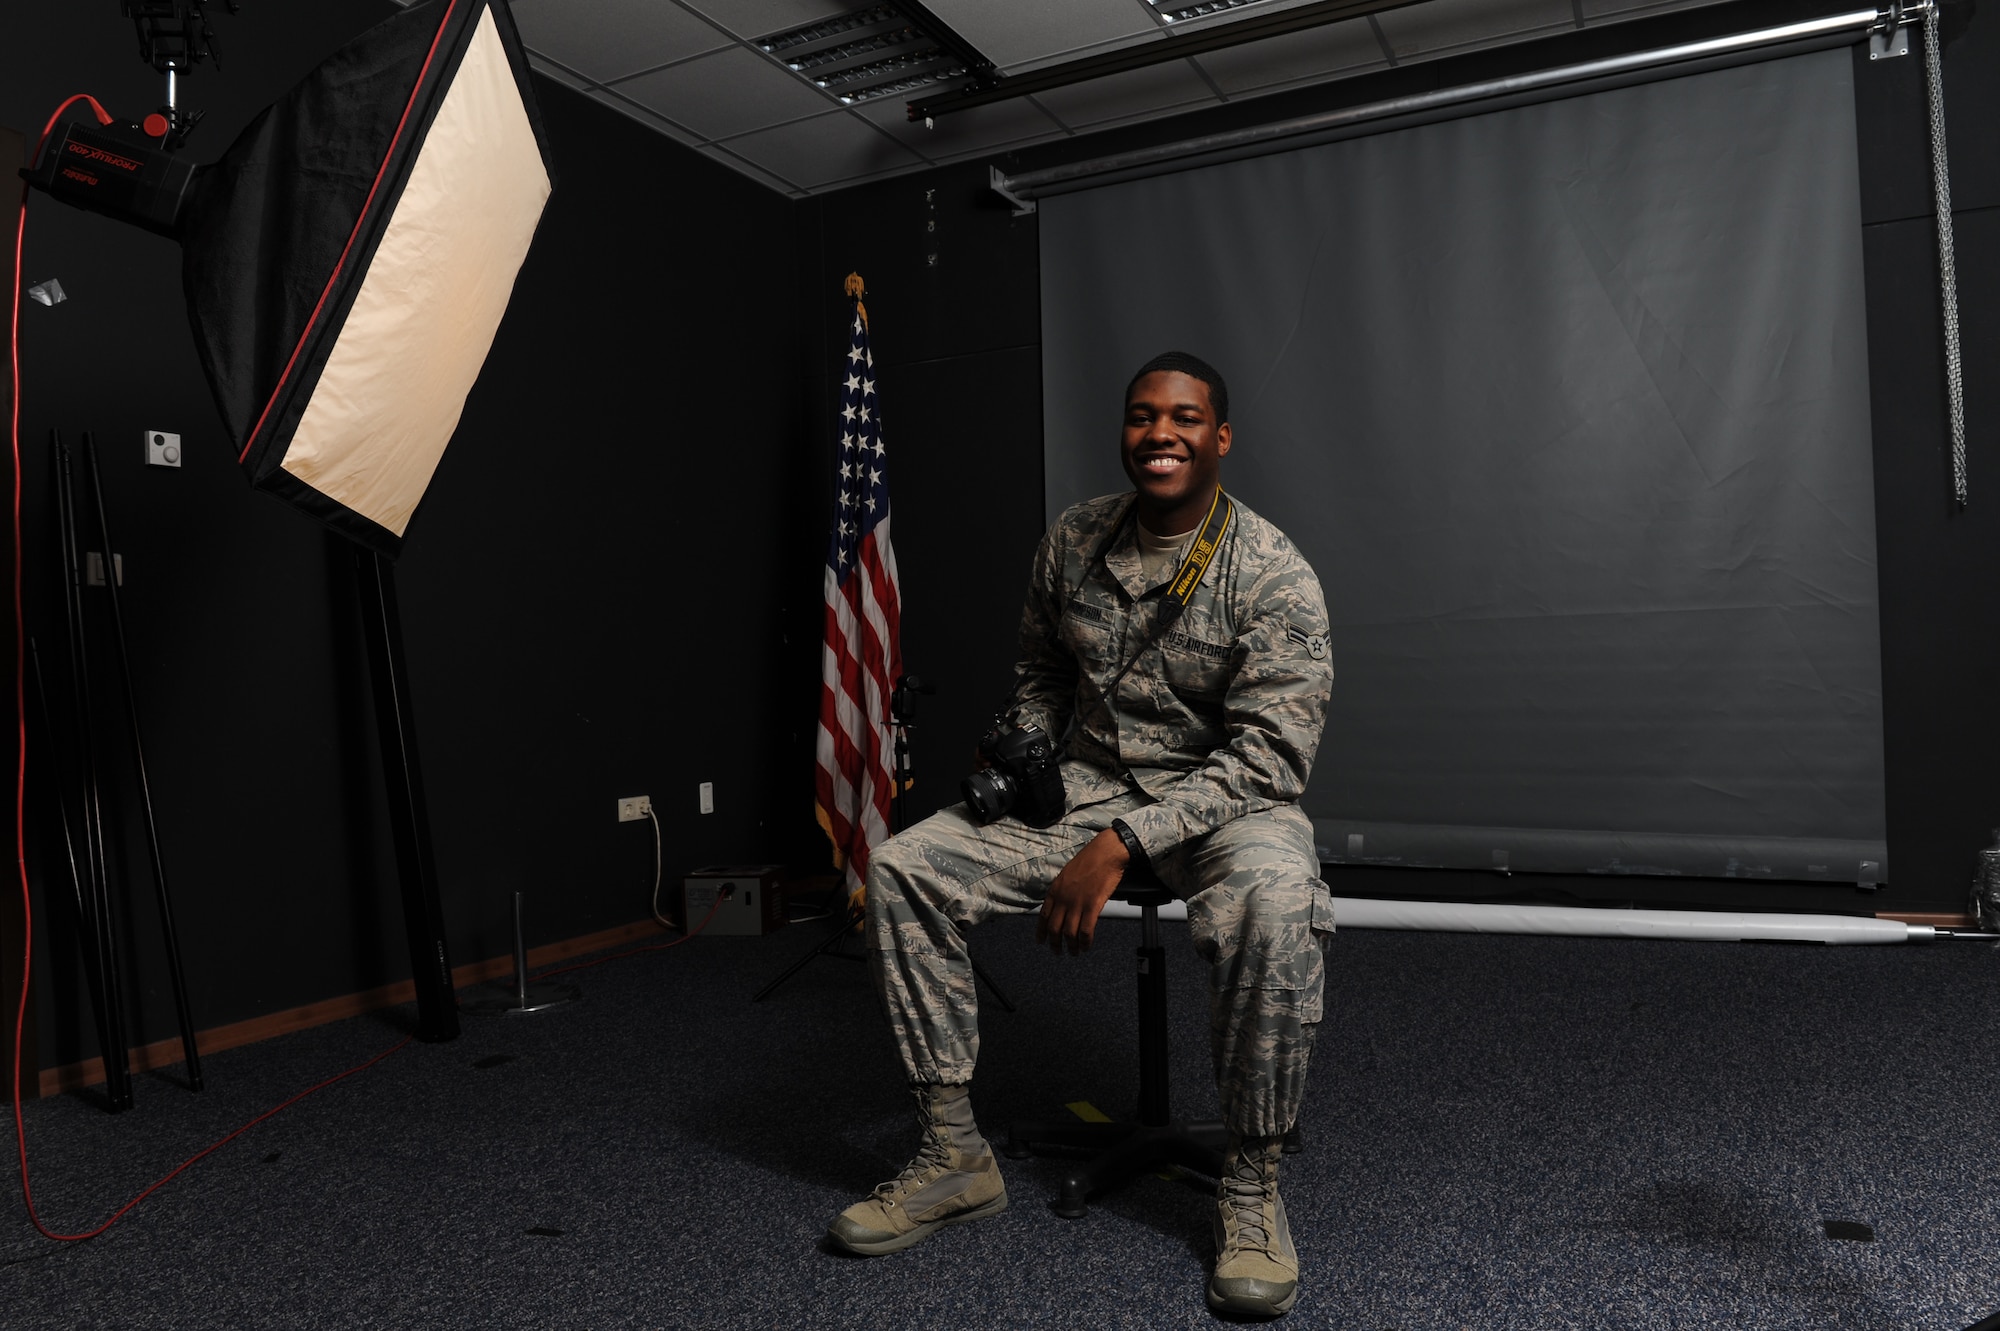 Airman 1st Class Octavius Thompson, 39th Air Base Wing photojournalist, poses for a photo at Incirlik Air Base Turkey, Jan. 17, 2019. Thompson appreciated the opportunities his first assignment afforded him and the teammates who helped him grow as an Airman. (U.S. Air Force photo by Senior Airman Kirby Turbak)